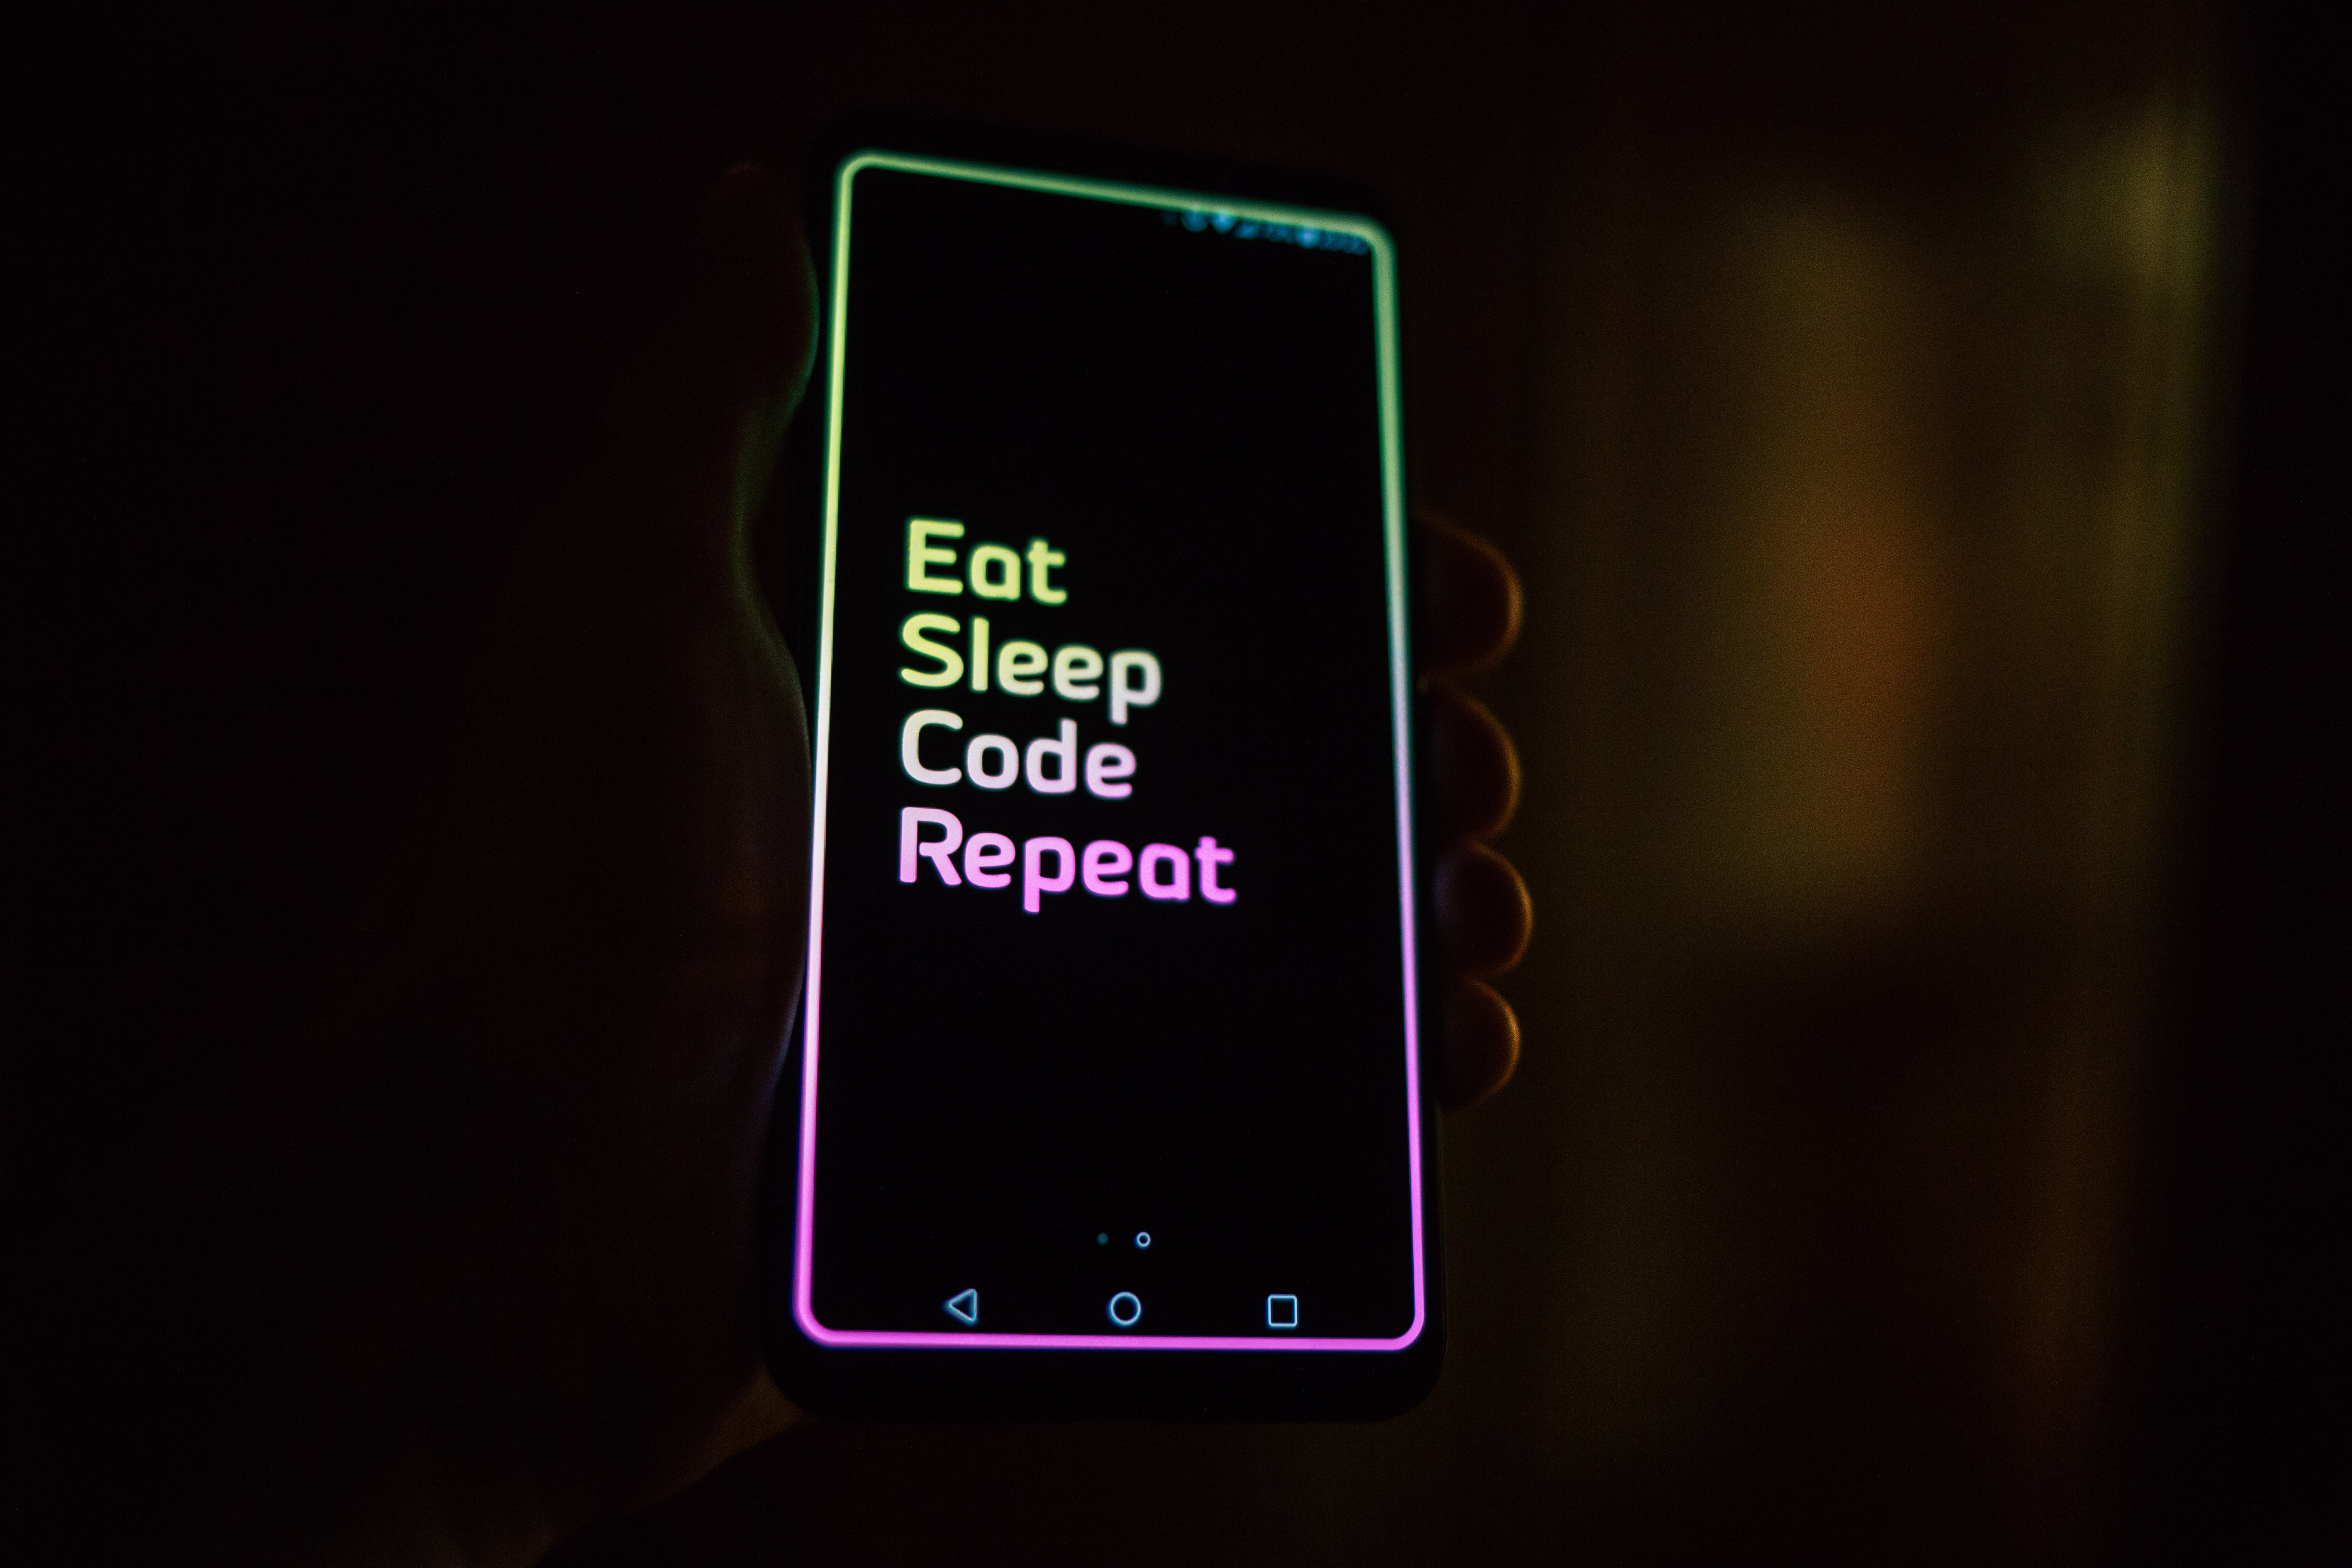 Eat Sleep Code Repeat Image by Roman Synkevych - Unsplash